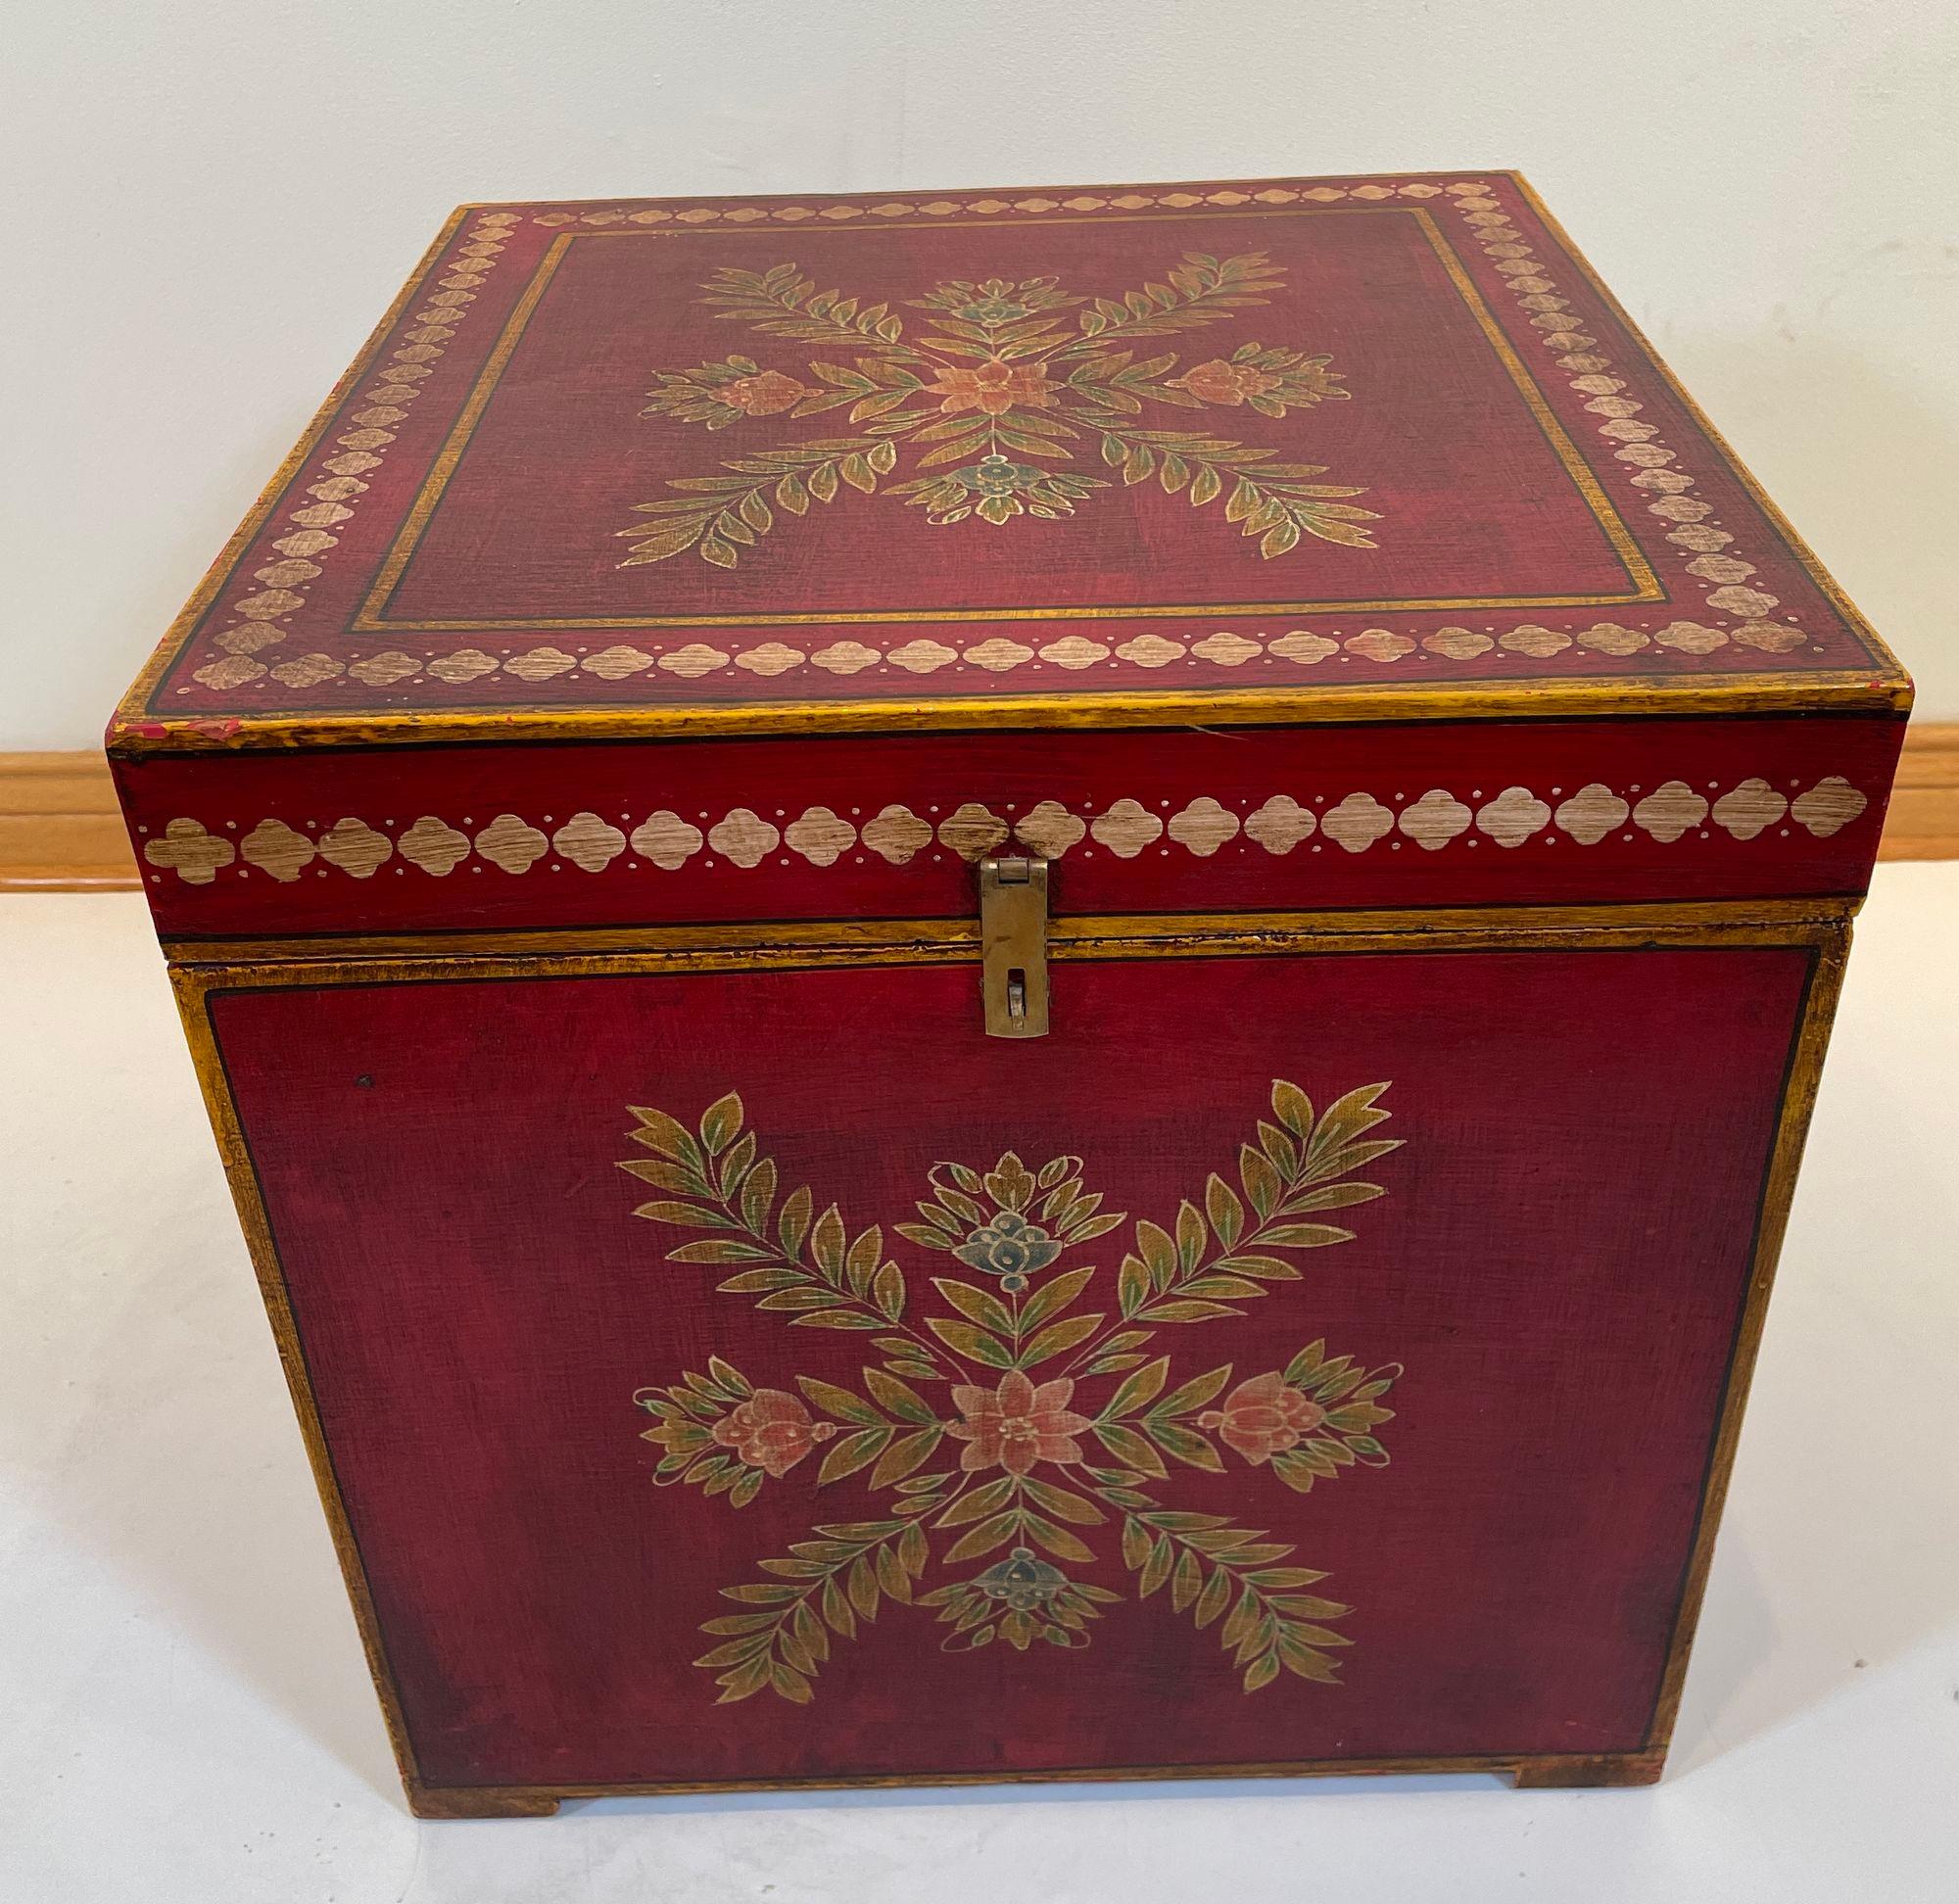 Vintage Folk Art lacquer hand painted decorative storage wooden trunk.
Mughal style small wood trunks with hinged lid clean lines and beautiful floral Rajasthani floral decor, this red lacquered side table will be an elegant decorative addition to